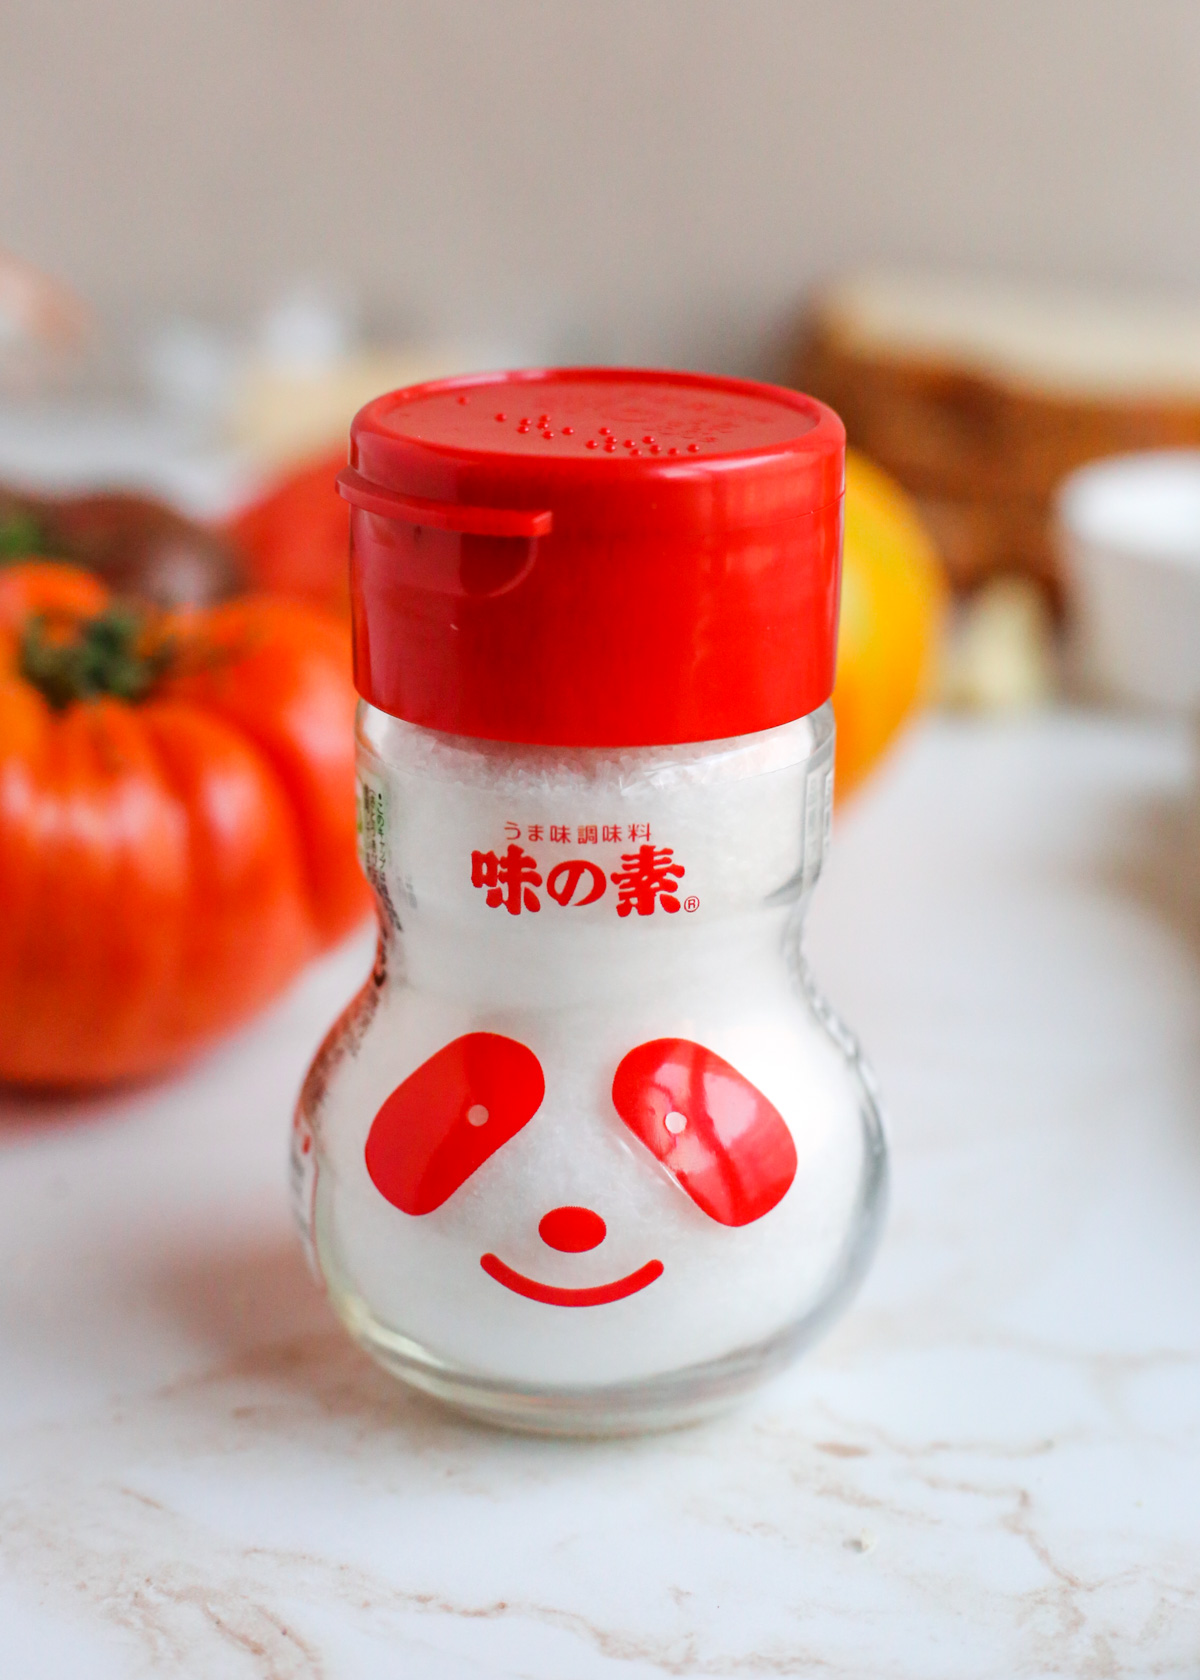 A panda-shaped shaker bottle with a red lid and lettering containing MSG is displayed on a kitchen countertop with fresh heirloom tomatoes in the background